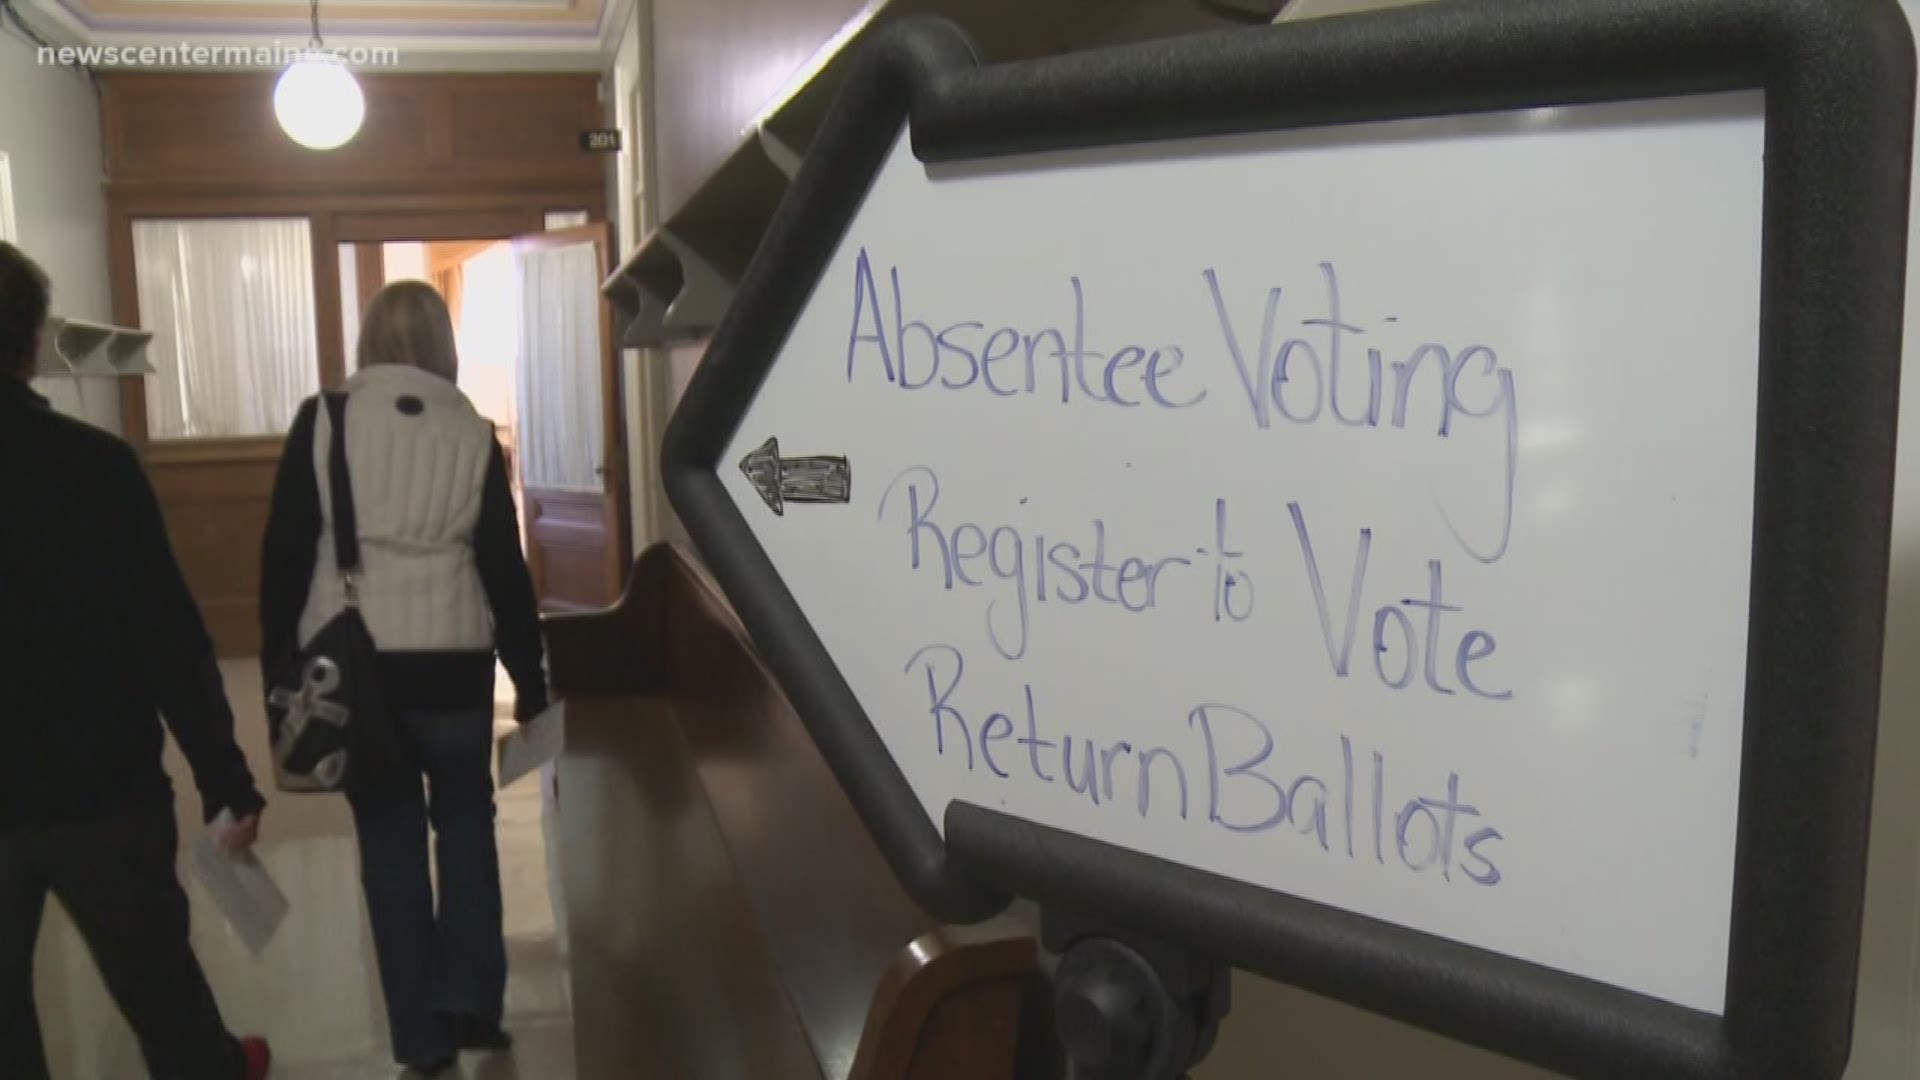 Sec. of State: Absentee ballots are ready